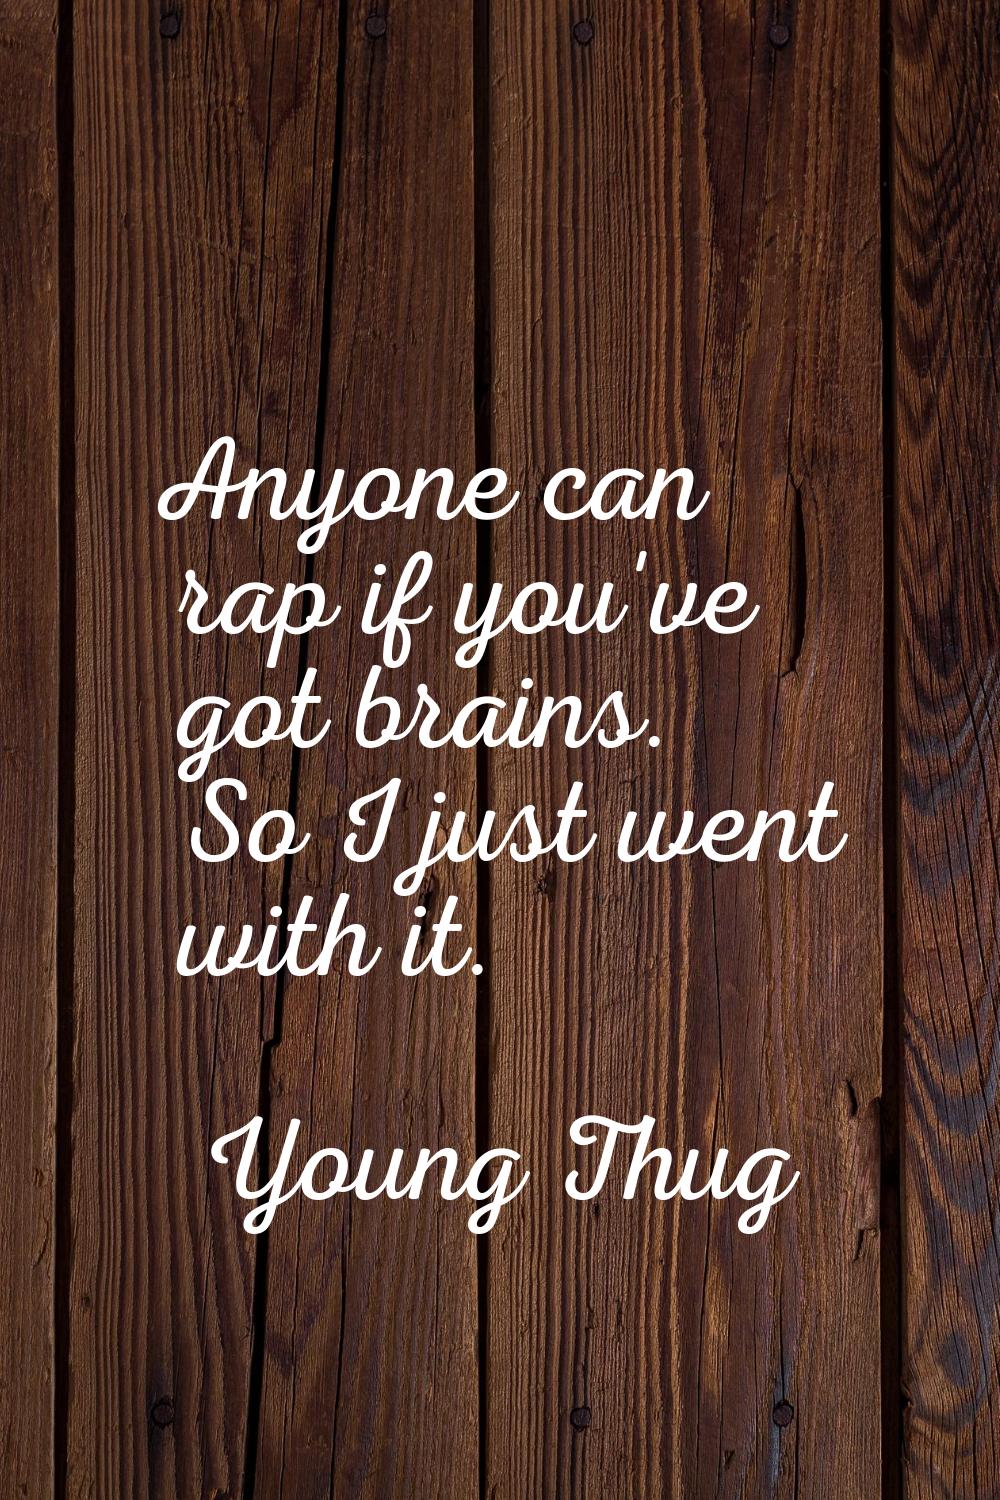 Anyone can rap if you've got brains. So I just went with it.